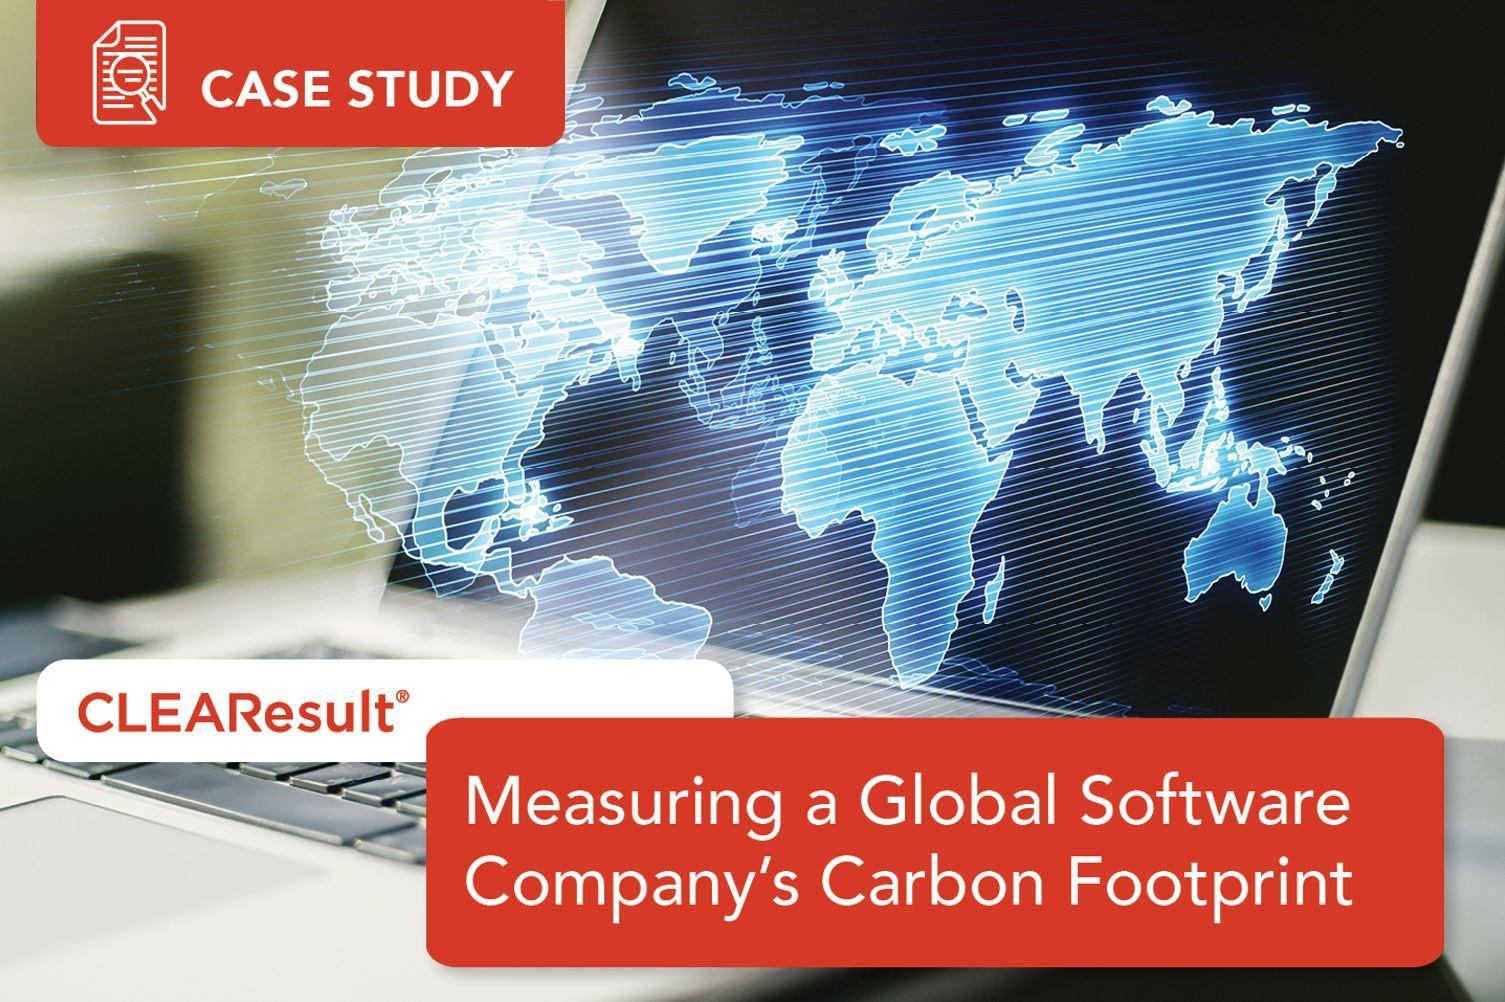 Case Study: Measuring a Global Software Company’s Carbon Footprint